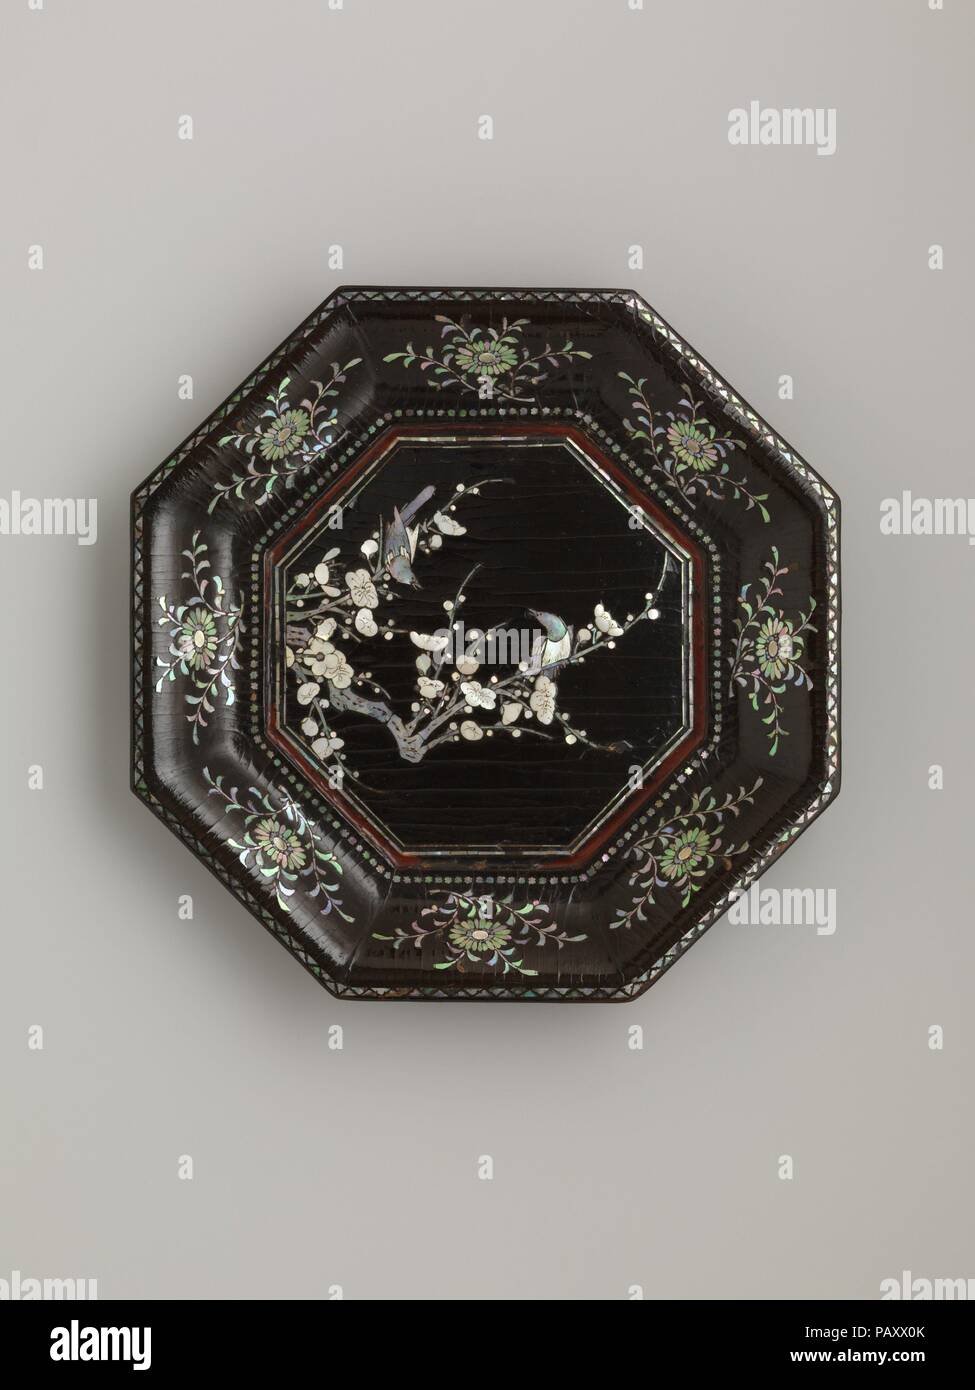 Dish with Flowering Plum and Birds. Culture: China. Dimensions: H. 1/8 in. (.3 cm); Diam.11 5/8 in. (29.5 cm). Date: 14th century.  Flowering plums and birds, possibly magpies, a popular theme in the paining and poetry of the Southern Song dynasty (1279-1368), were understood as harbingers of spring, because the plum is one of the first blossoms to appear as winter ends. This depiction of plum blossoms, which range from buds to full blooms, derives from the influential Manual of Plum Blossom Likeness (Meihua xishen pu), written by the artist Song Boren in the mid-thirteenth century, which disc Stock Photo